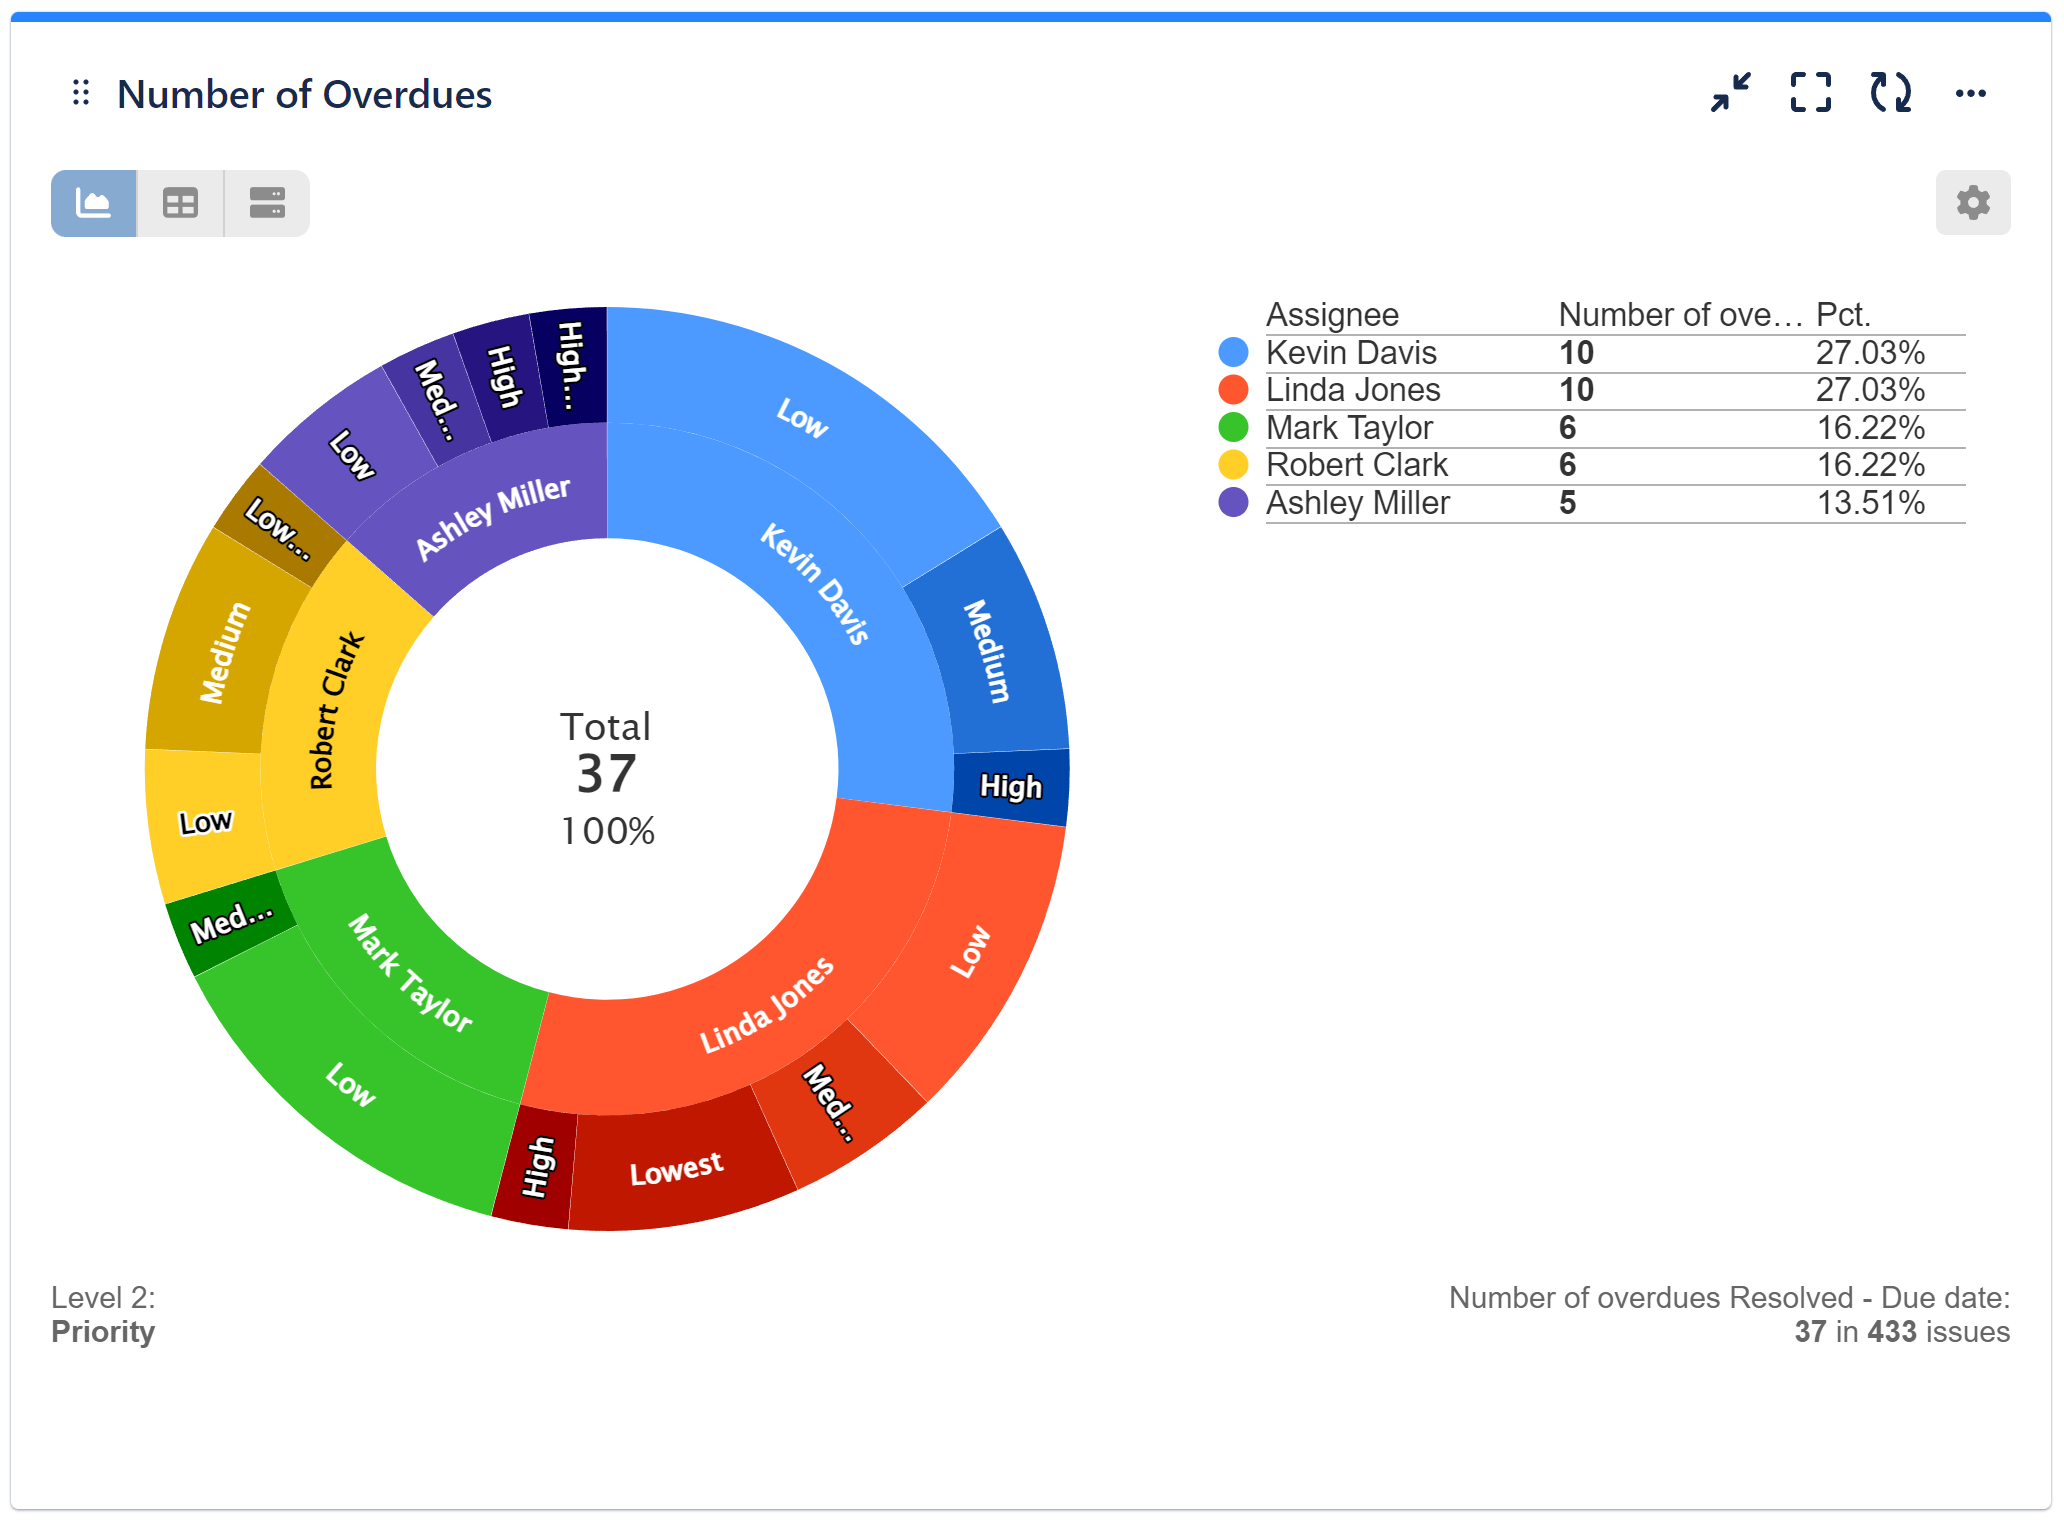 Number of overdues donut chart